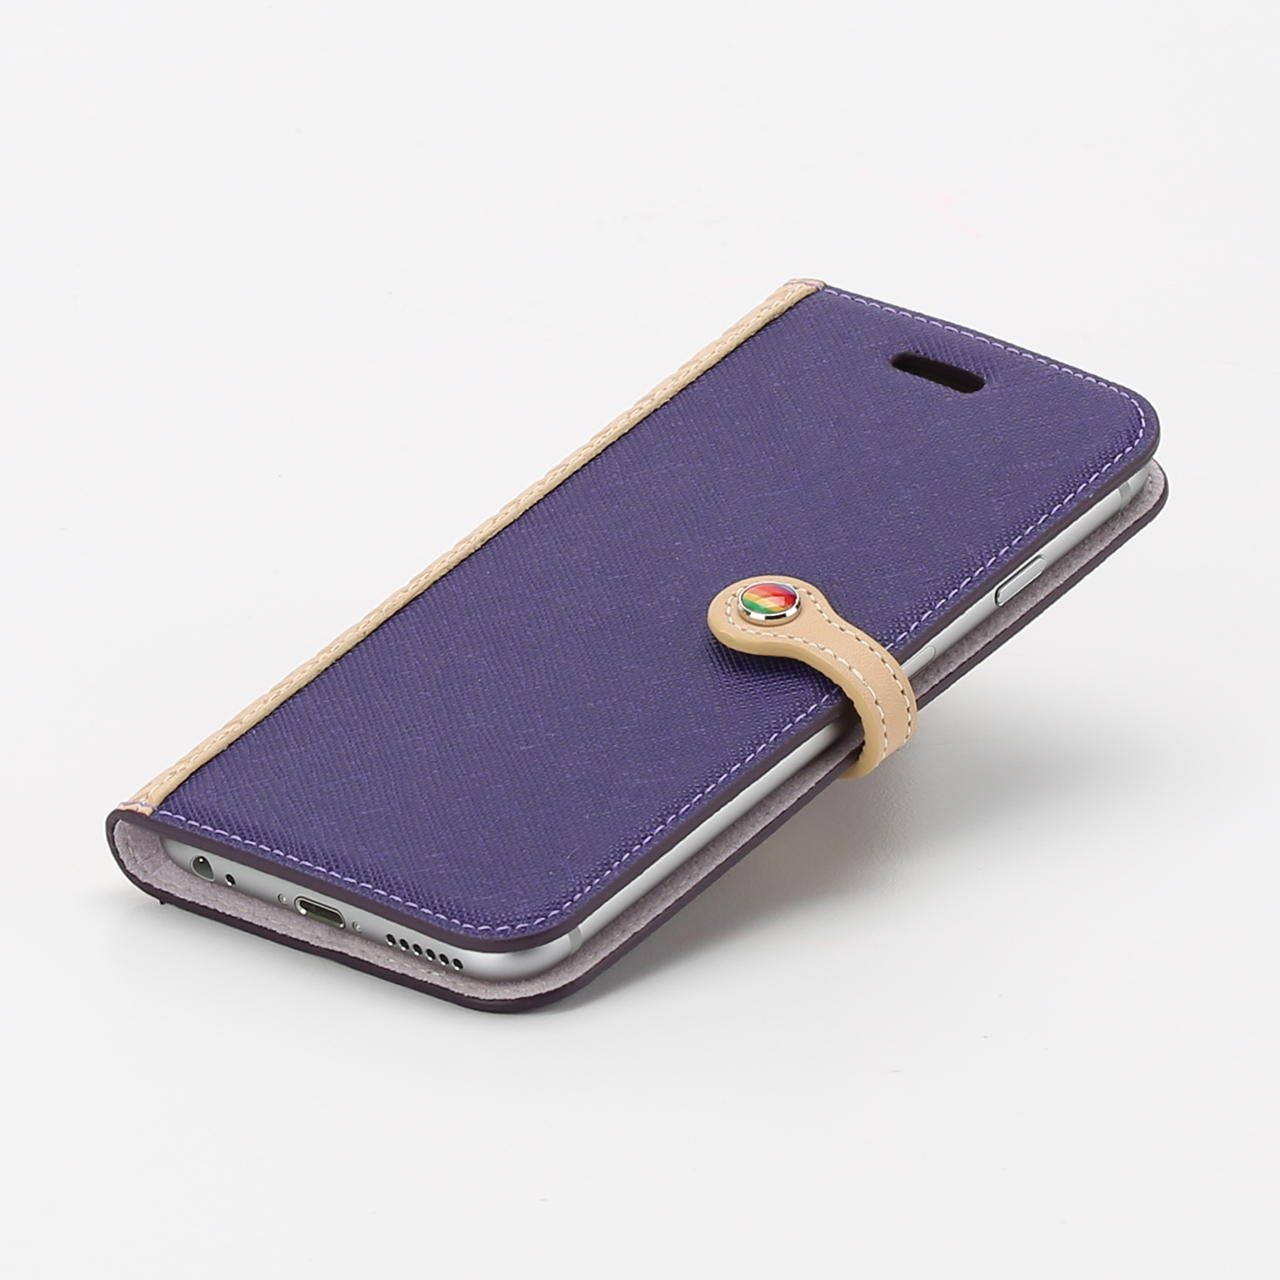 lims-saffiano-leather-slim-fit-edition-iphone-6-09.jpg